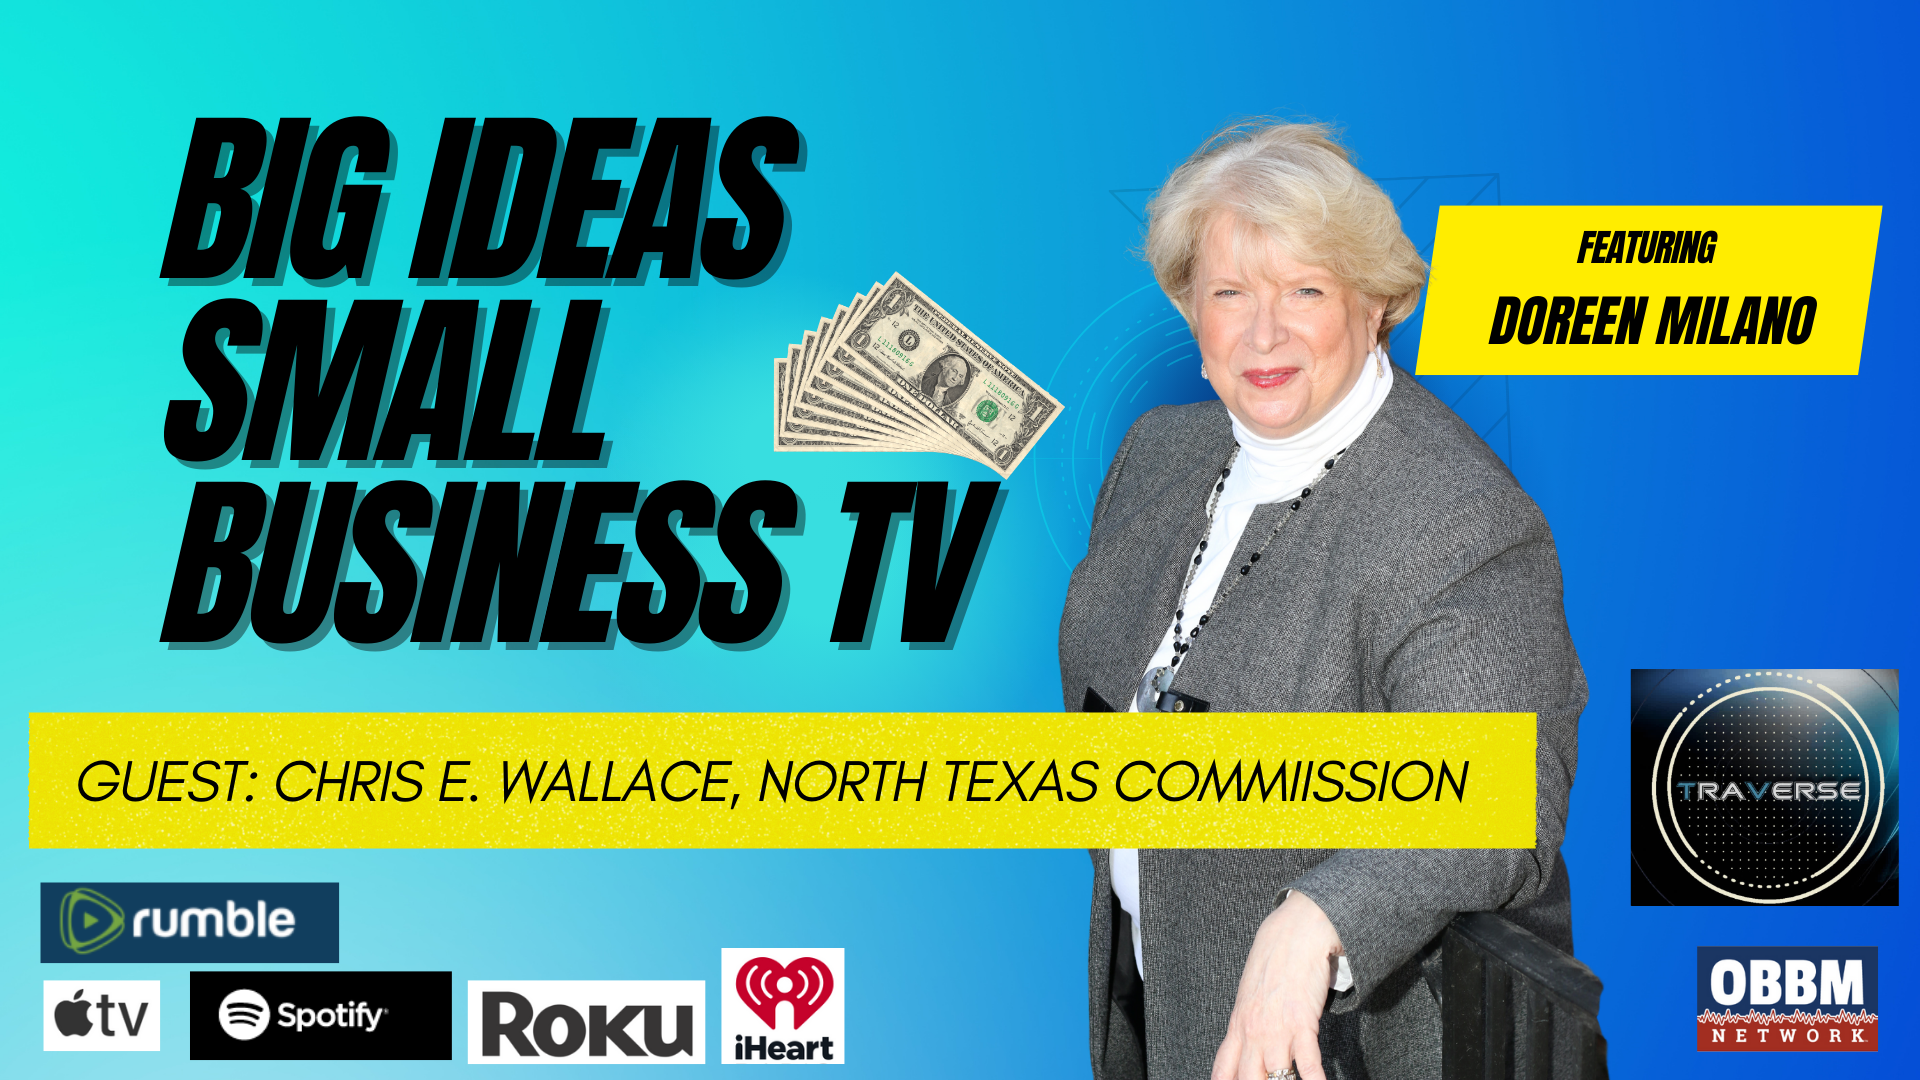 BISB33-What IS The North Texas Commission Big Ideas, Small Business TV with Doreen Milano